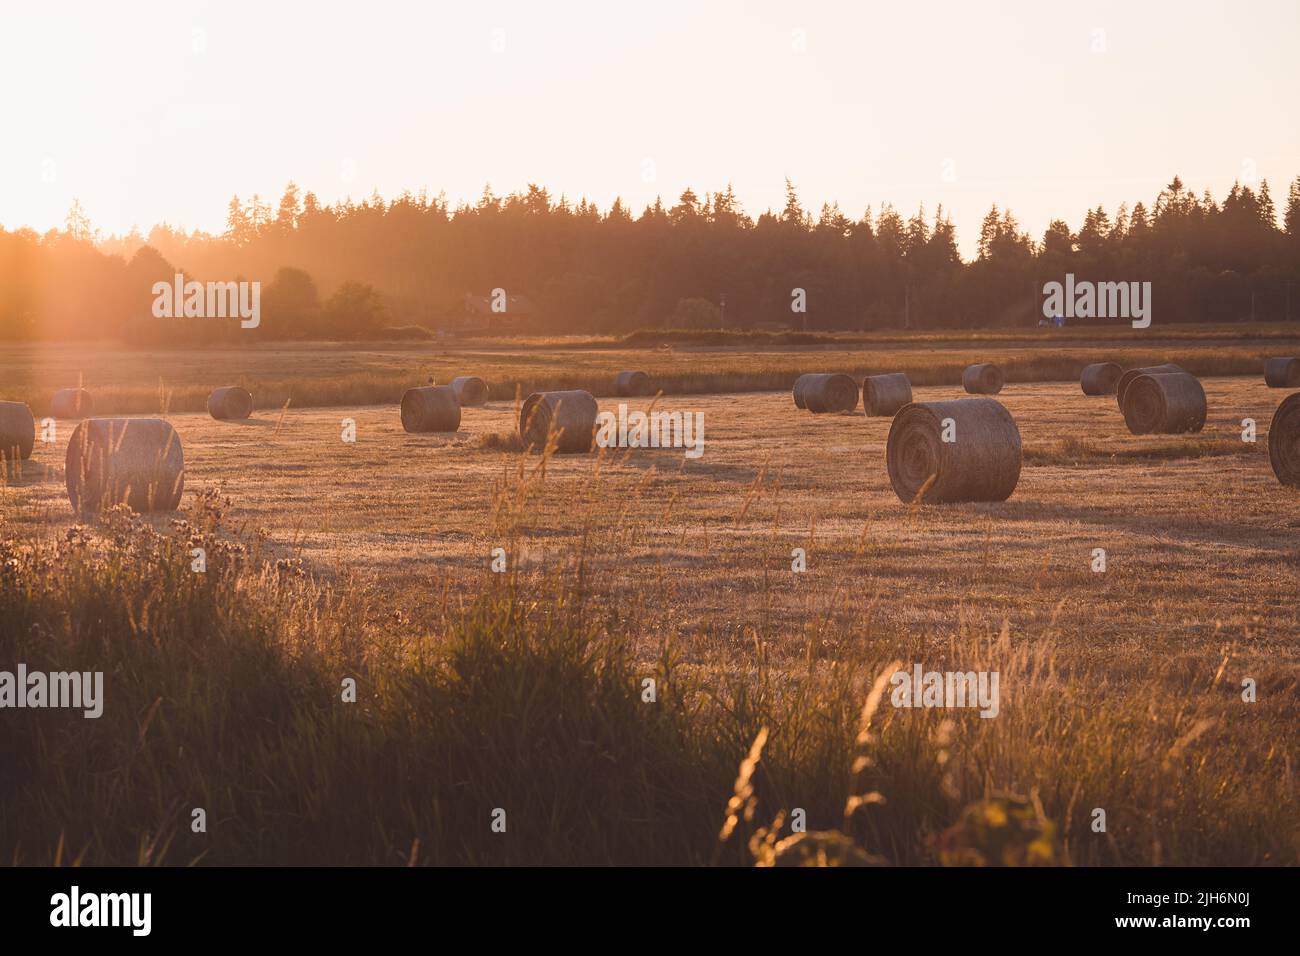 Many Rolls of Hay Bales in Wheat Field at Sunset Stock Photo